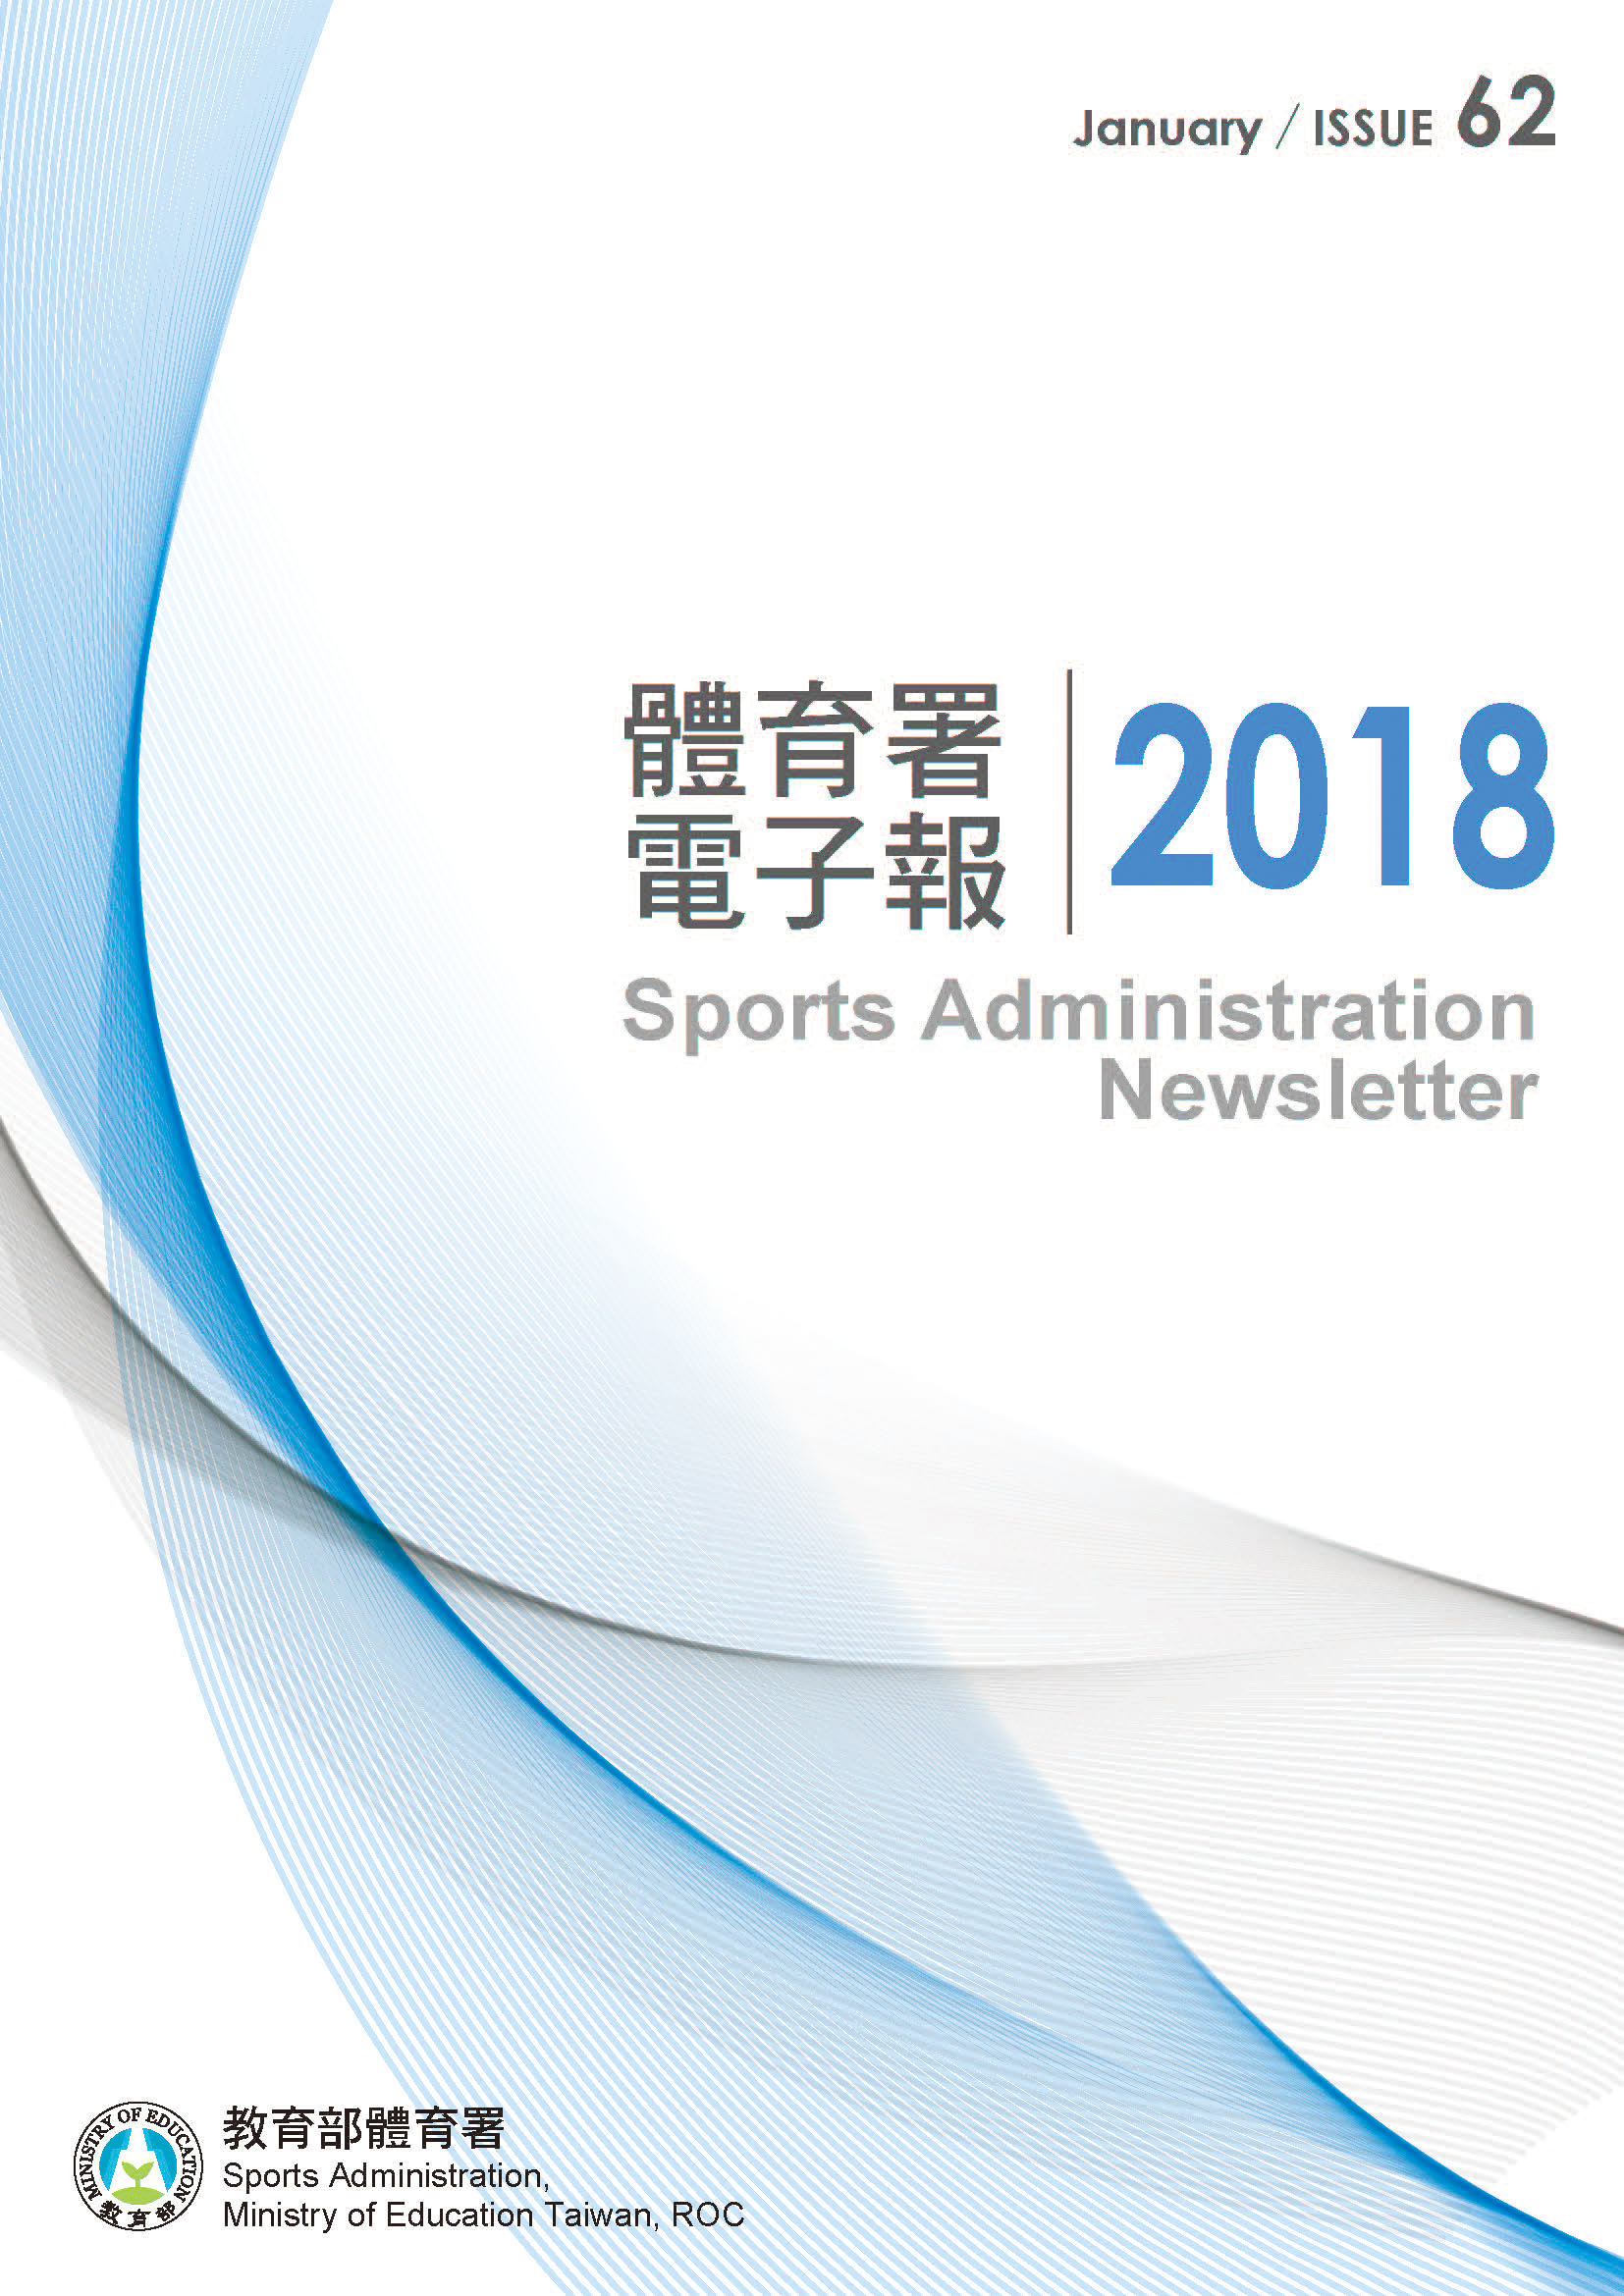 Sports Administration Newsletter #62 January 2018